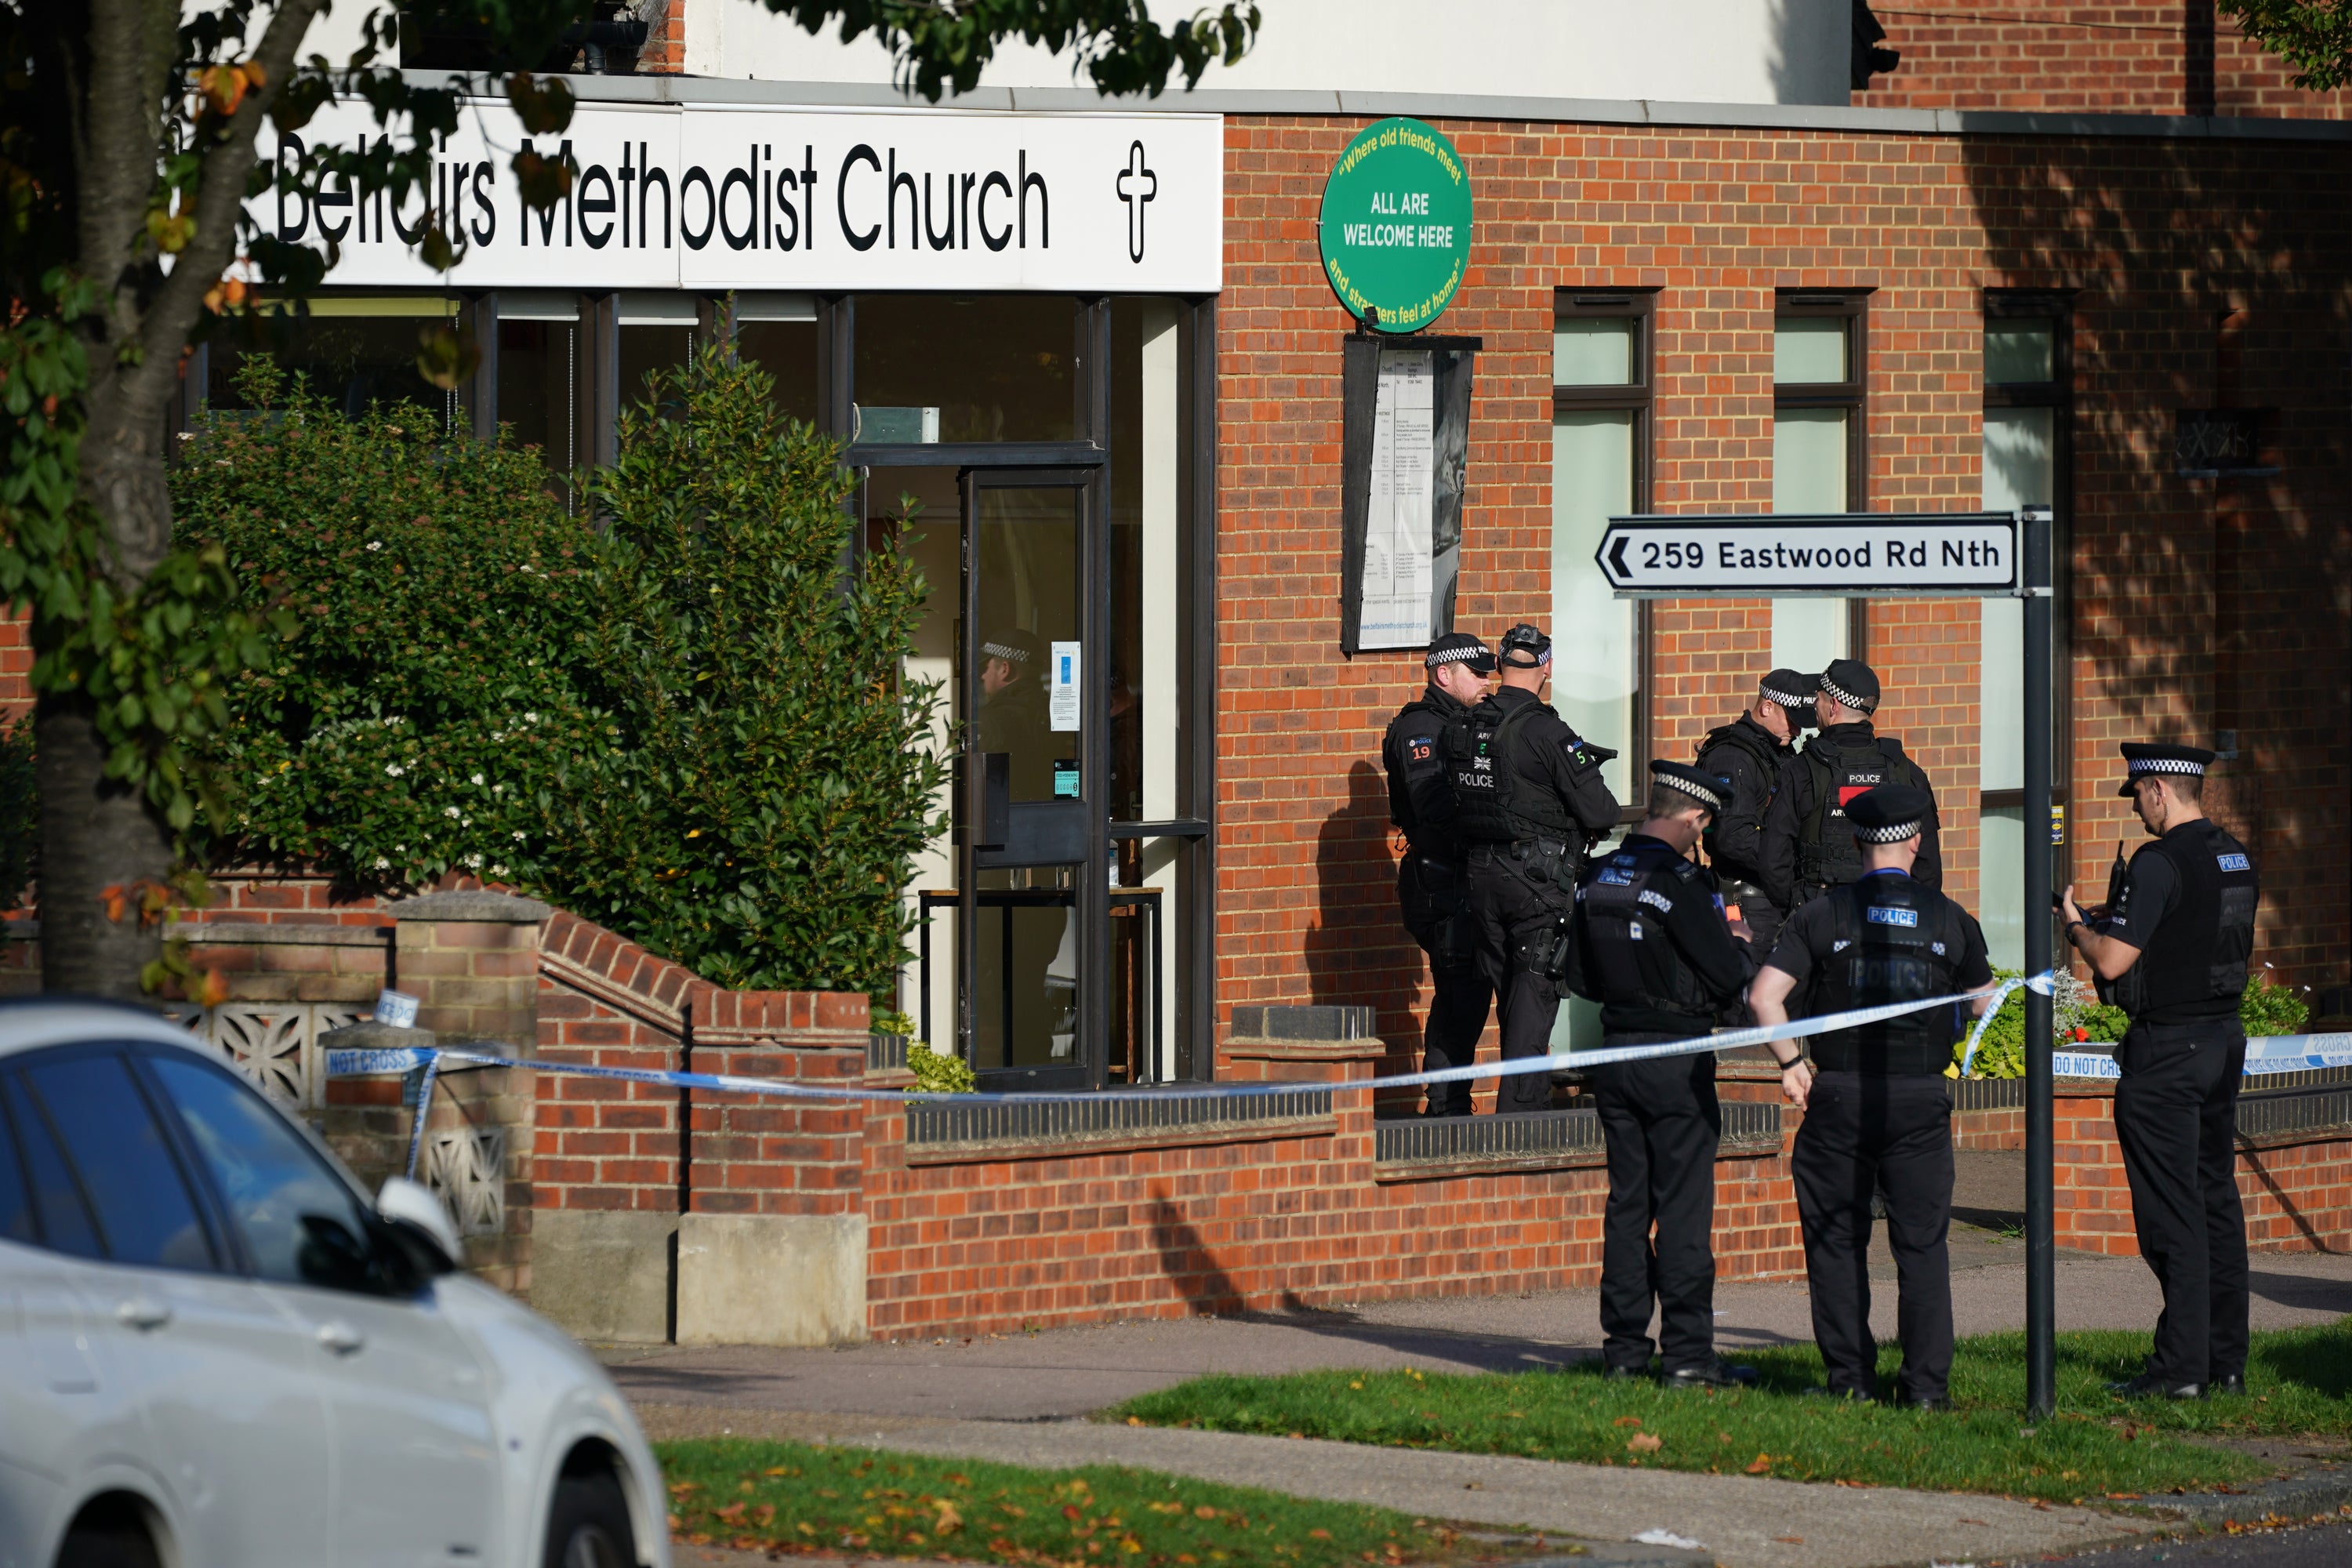 Emergency services at the scene at the Belfairs Methodist Church